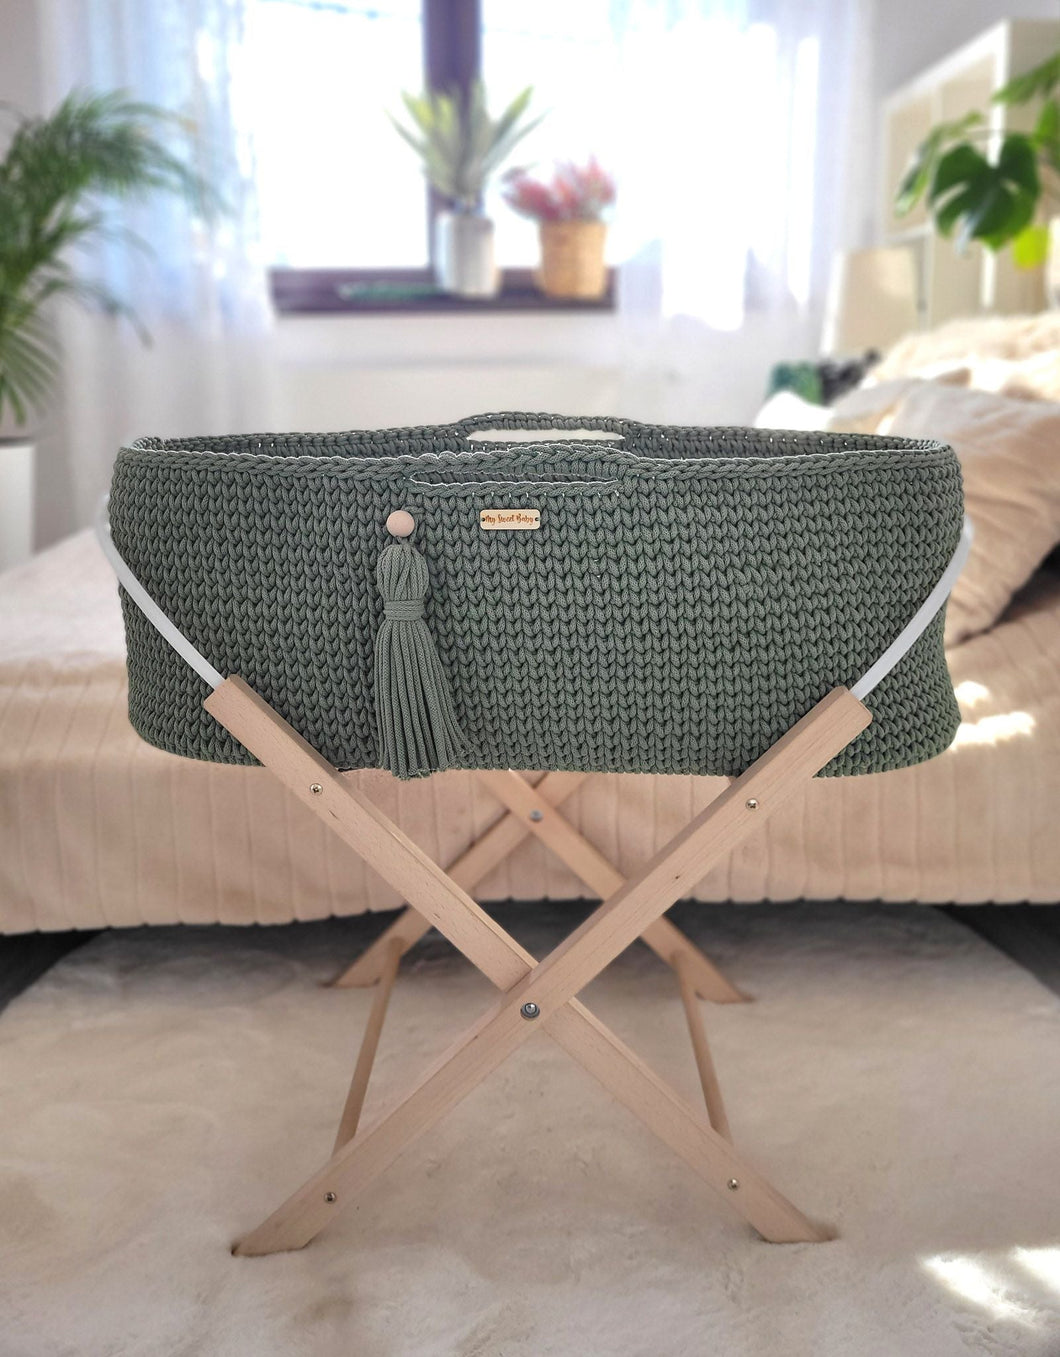 Pistachio Crochet Moses Basket without stand